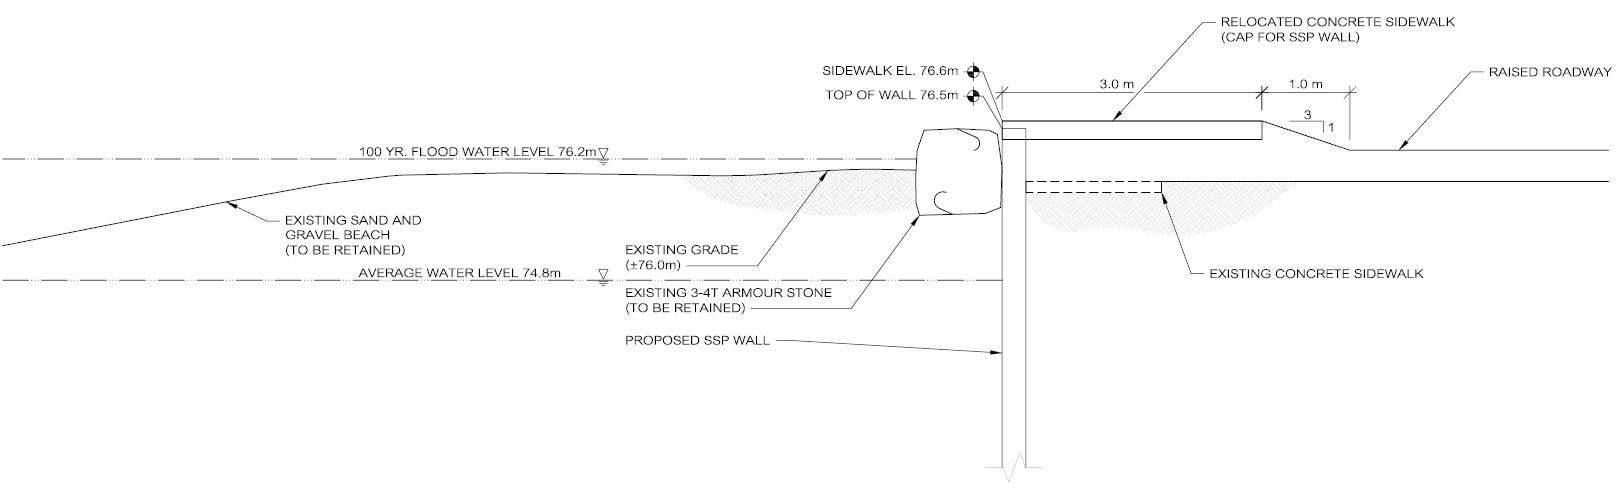 Cross-section of sheet pile wall with armourstone on beach side and raised sidewalk on land side.